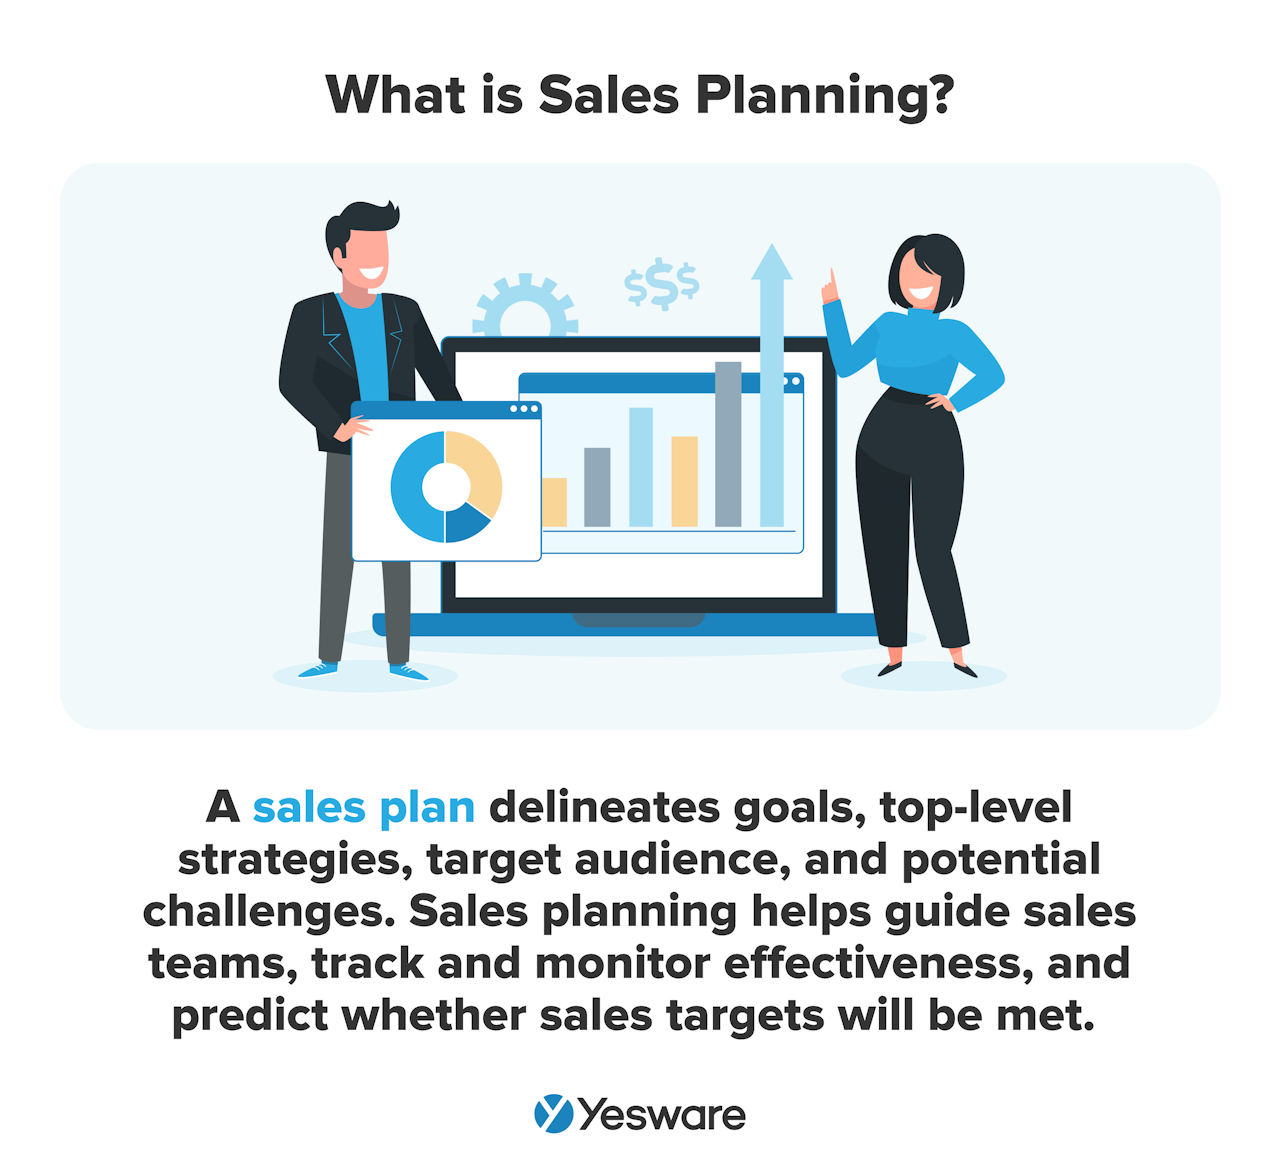 what is sales planning?